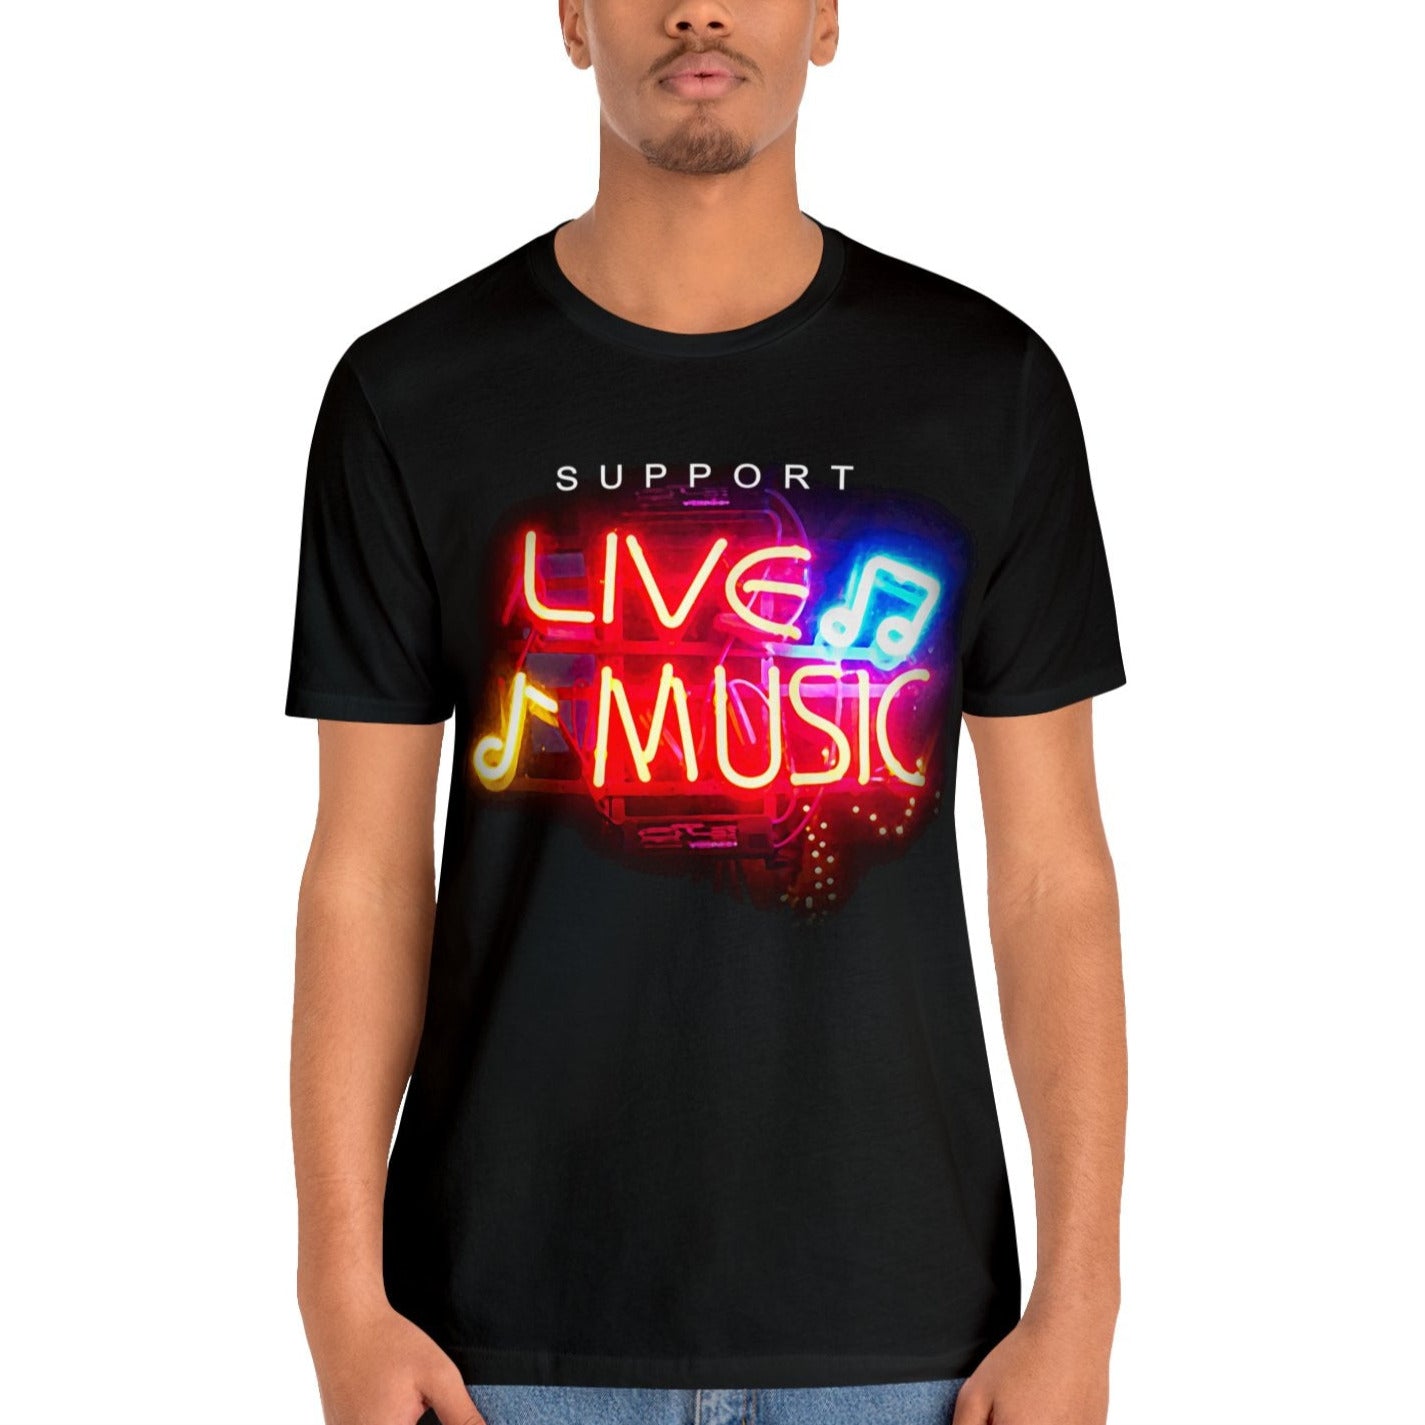 Support LIVE Music Neon Sign Tee - Retro bright on black Unisex Bella+Canvas 3001, Gift for Music Lovers and Musicians